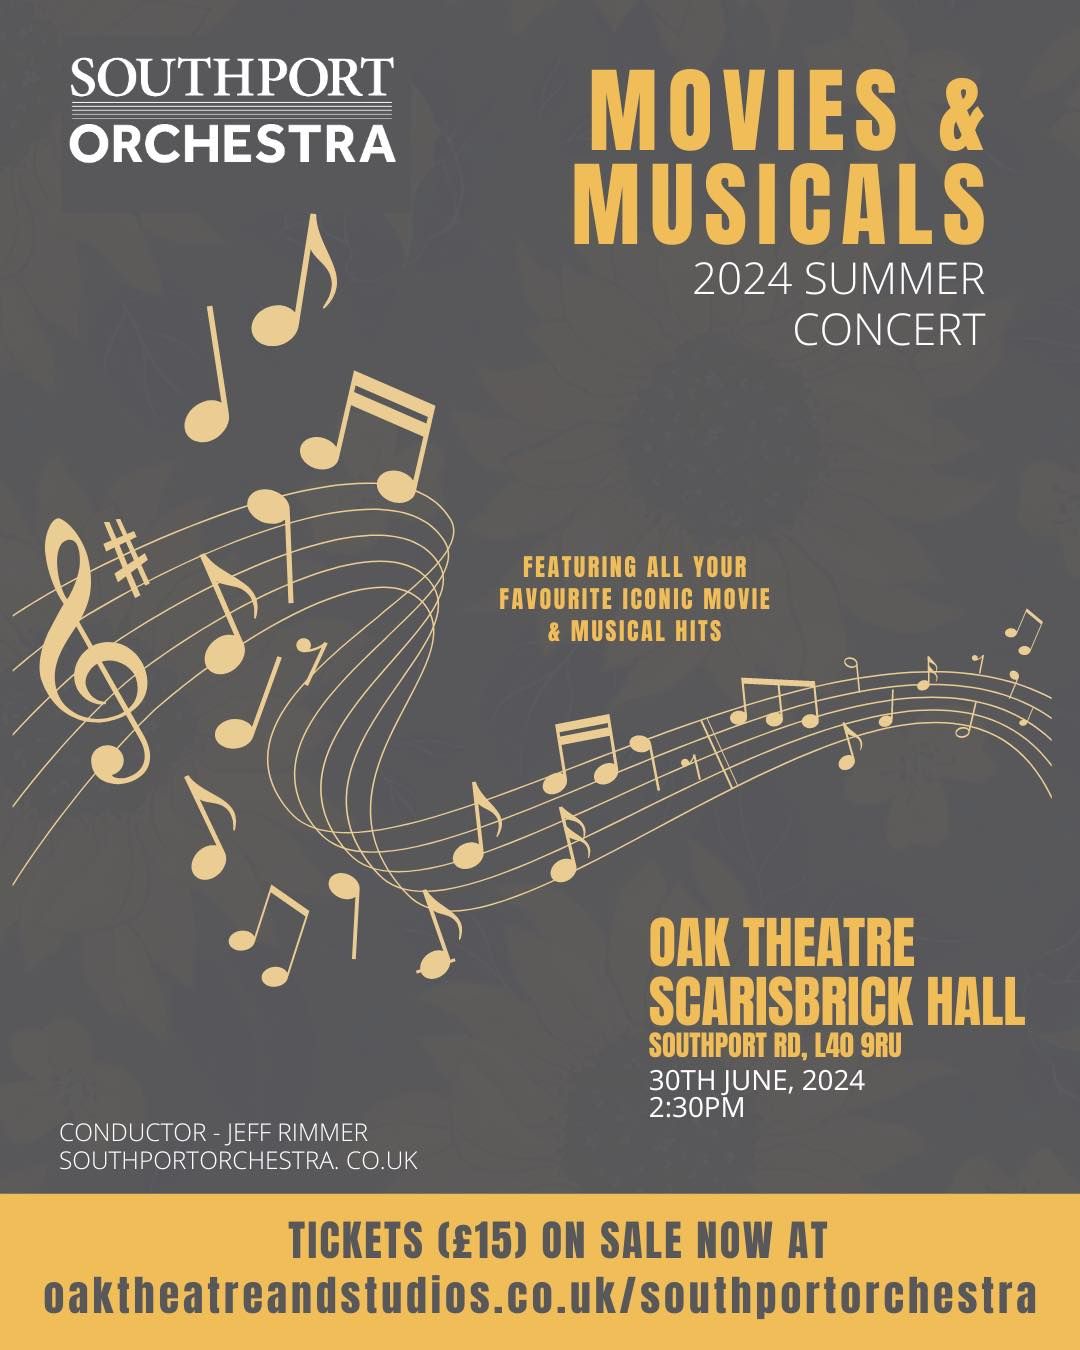 Southport Orchestra's 'Movies & Musicals' \ud83c\udfb6